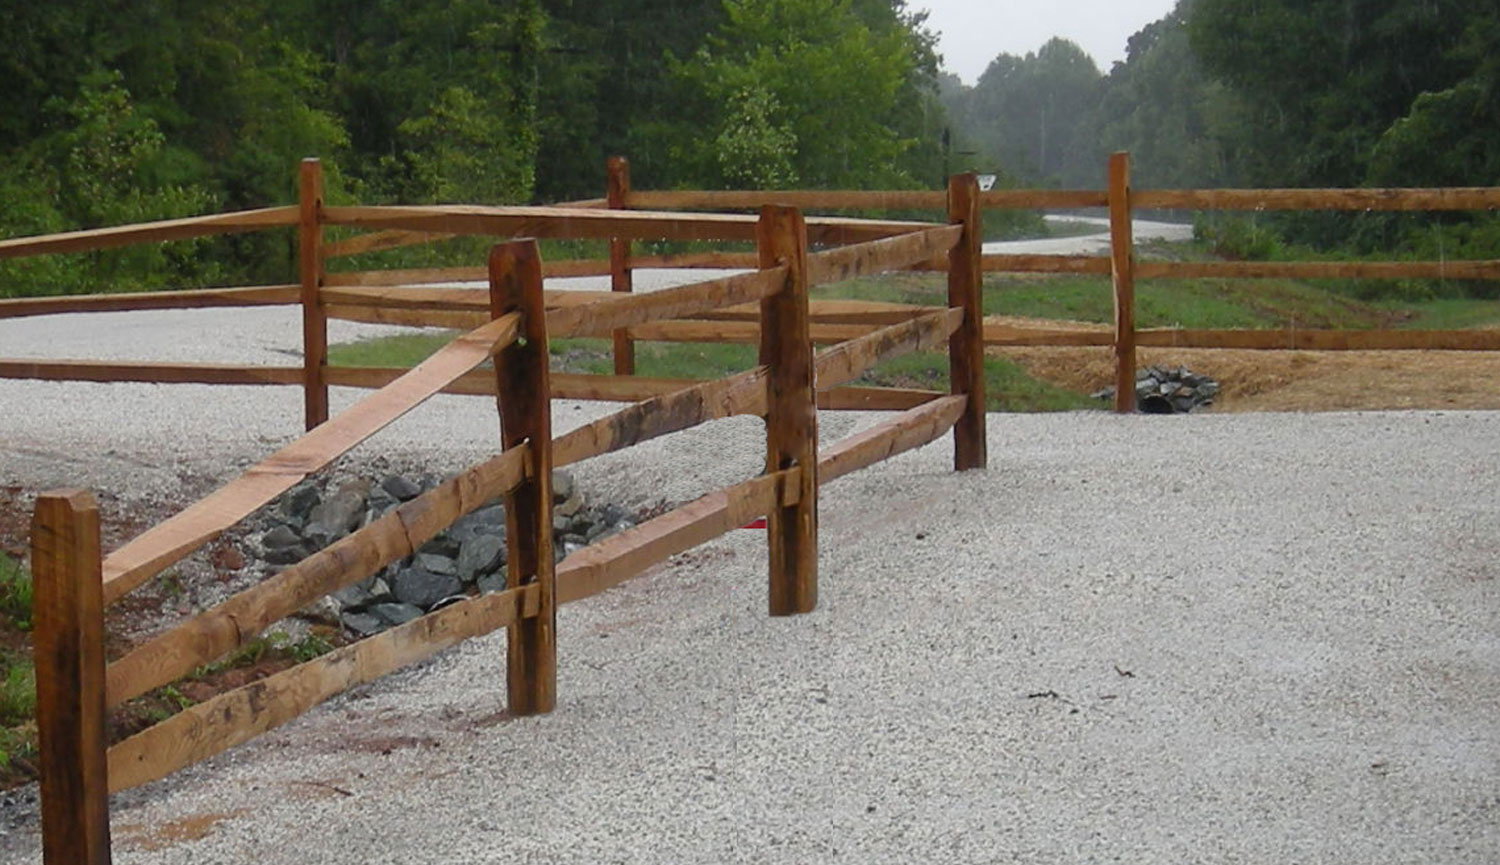 Rails to Trails Virginia State Park fence installation